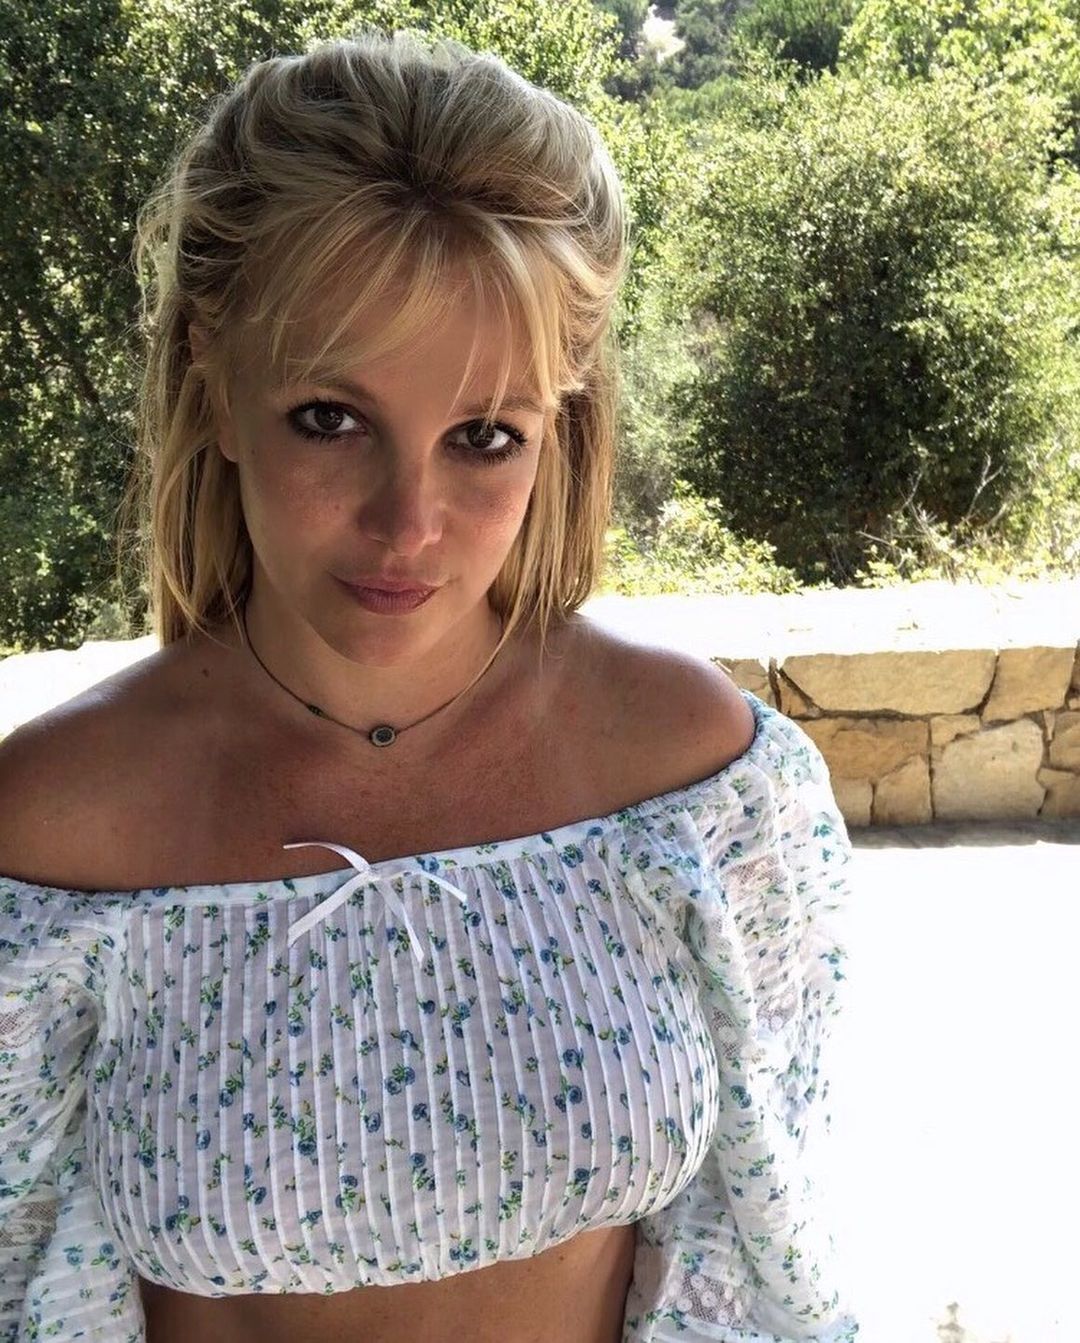 Britney Spears wearing a white top